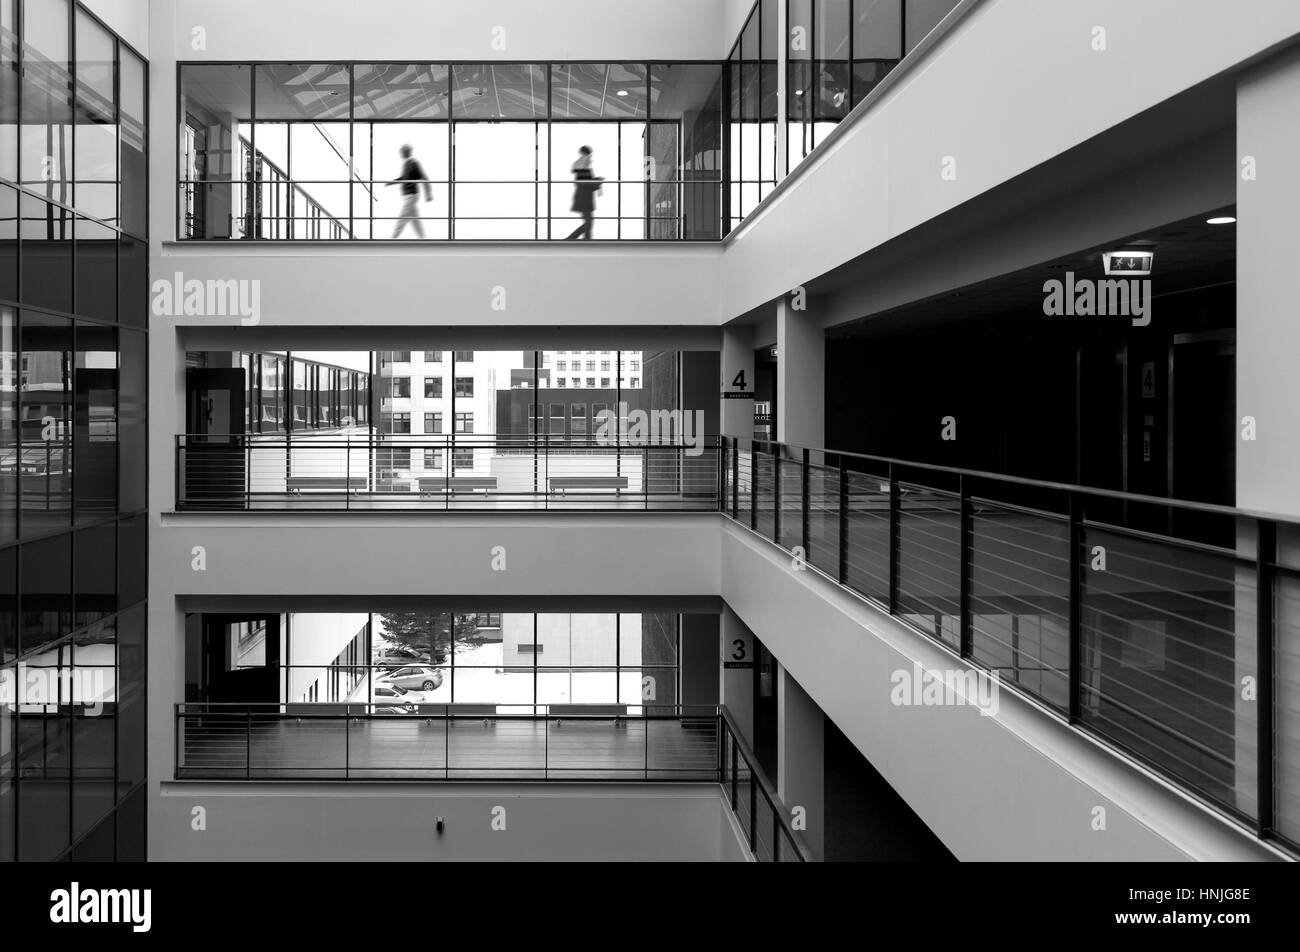 Modern public building interior with two figures walking in the background. High contrast black and white picture Stock Photo